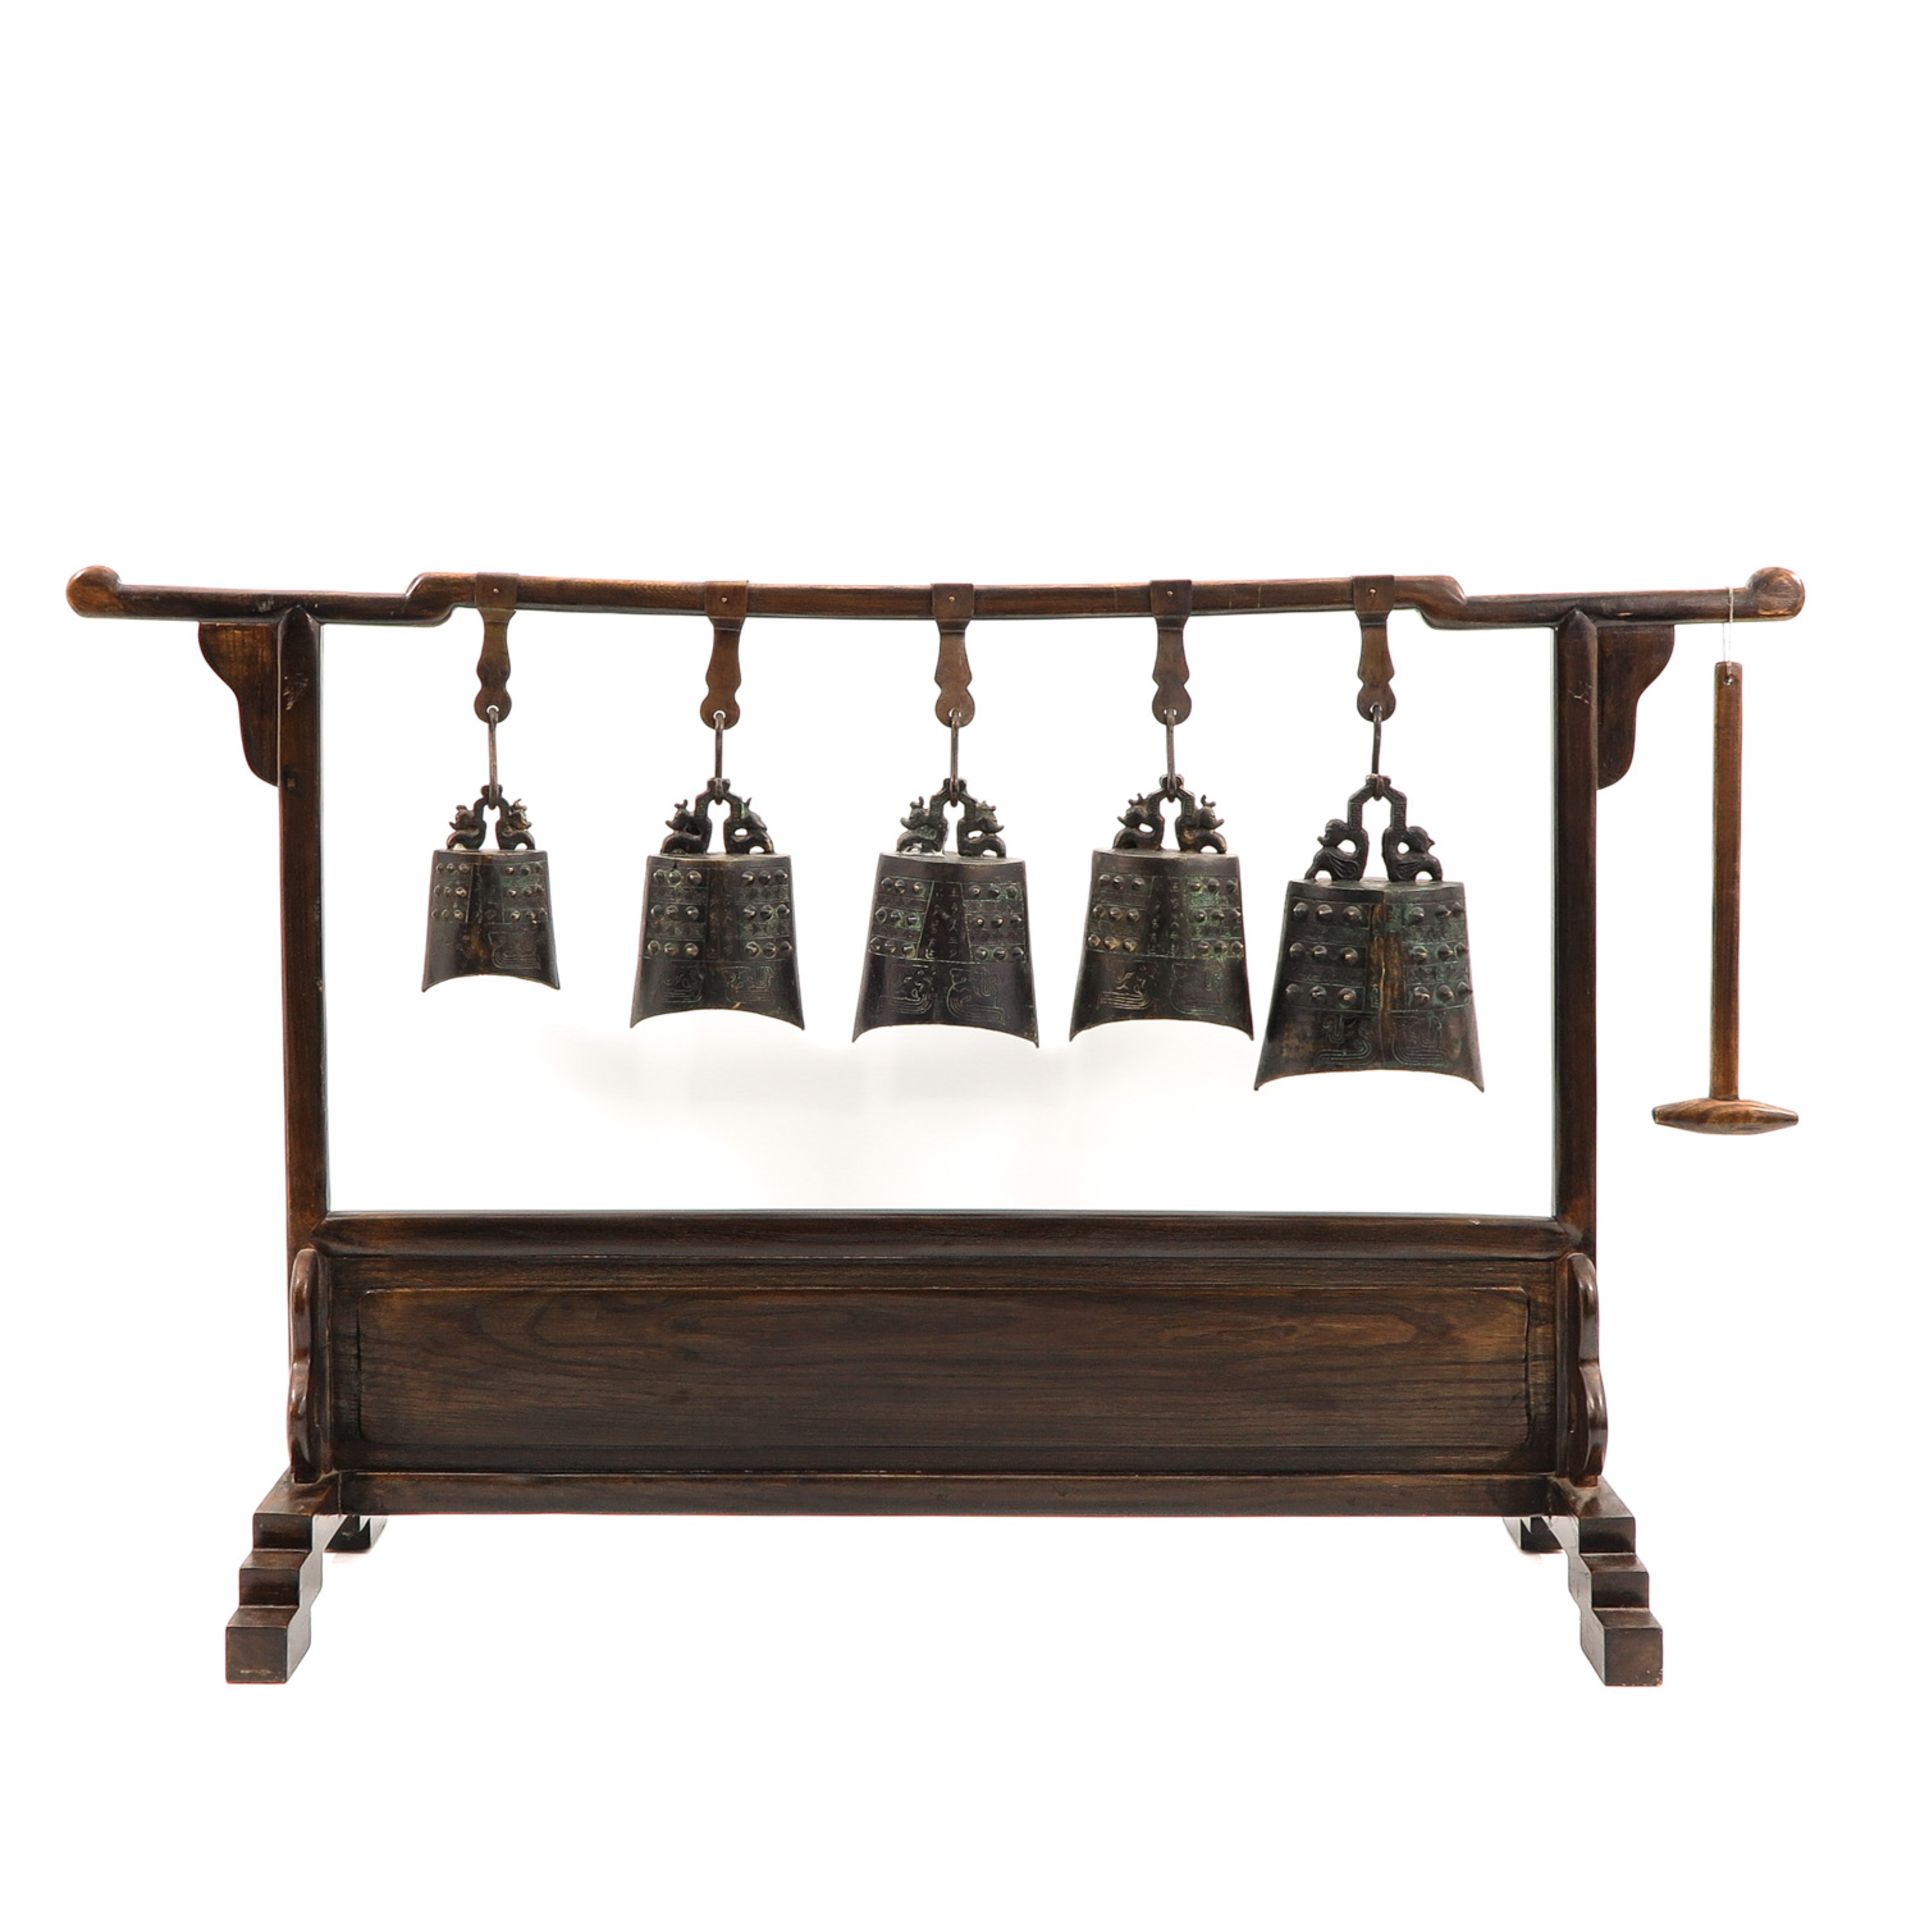 A Chinese Standing Rack with Bells and Mallet